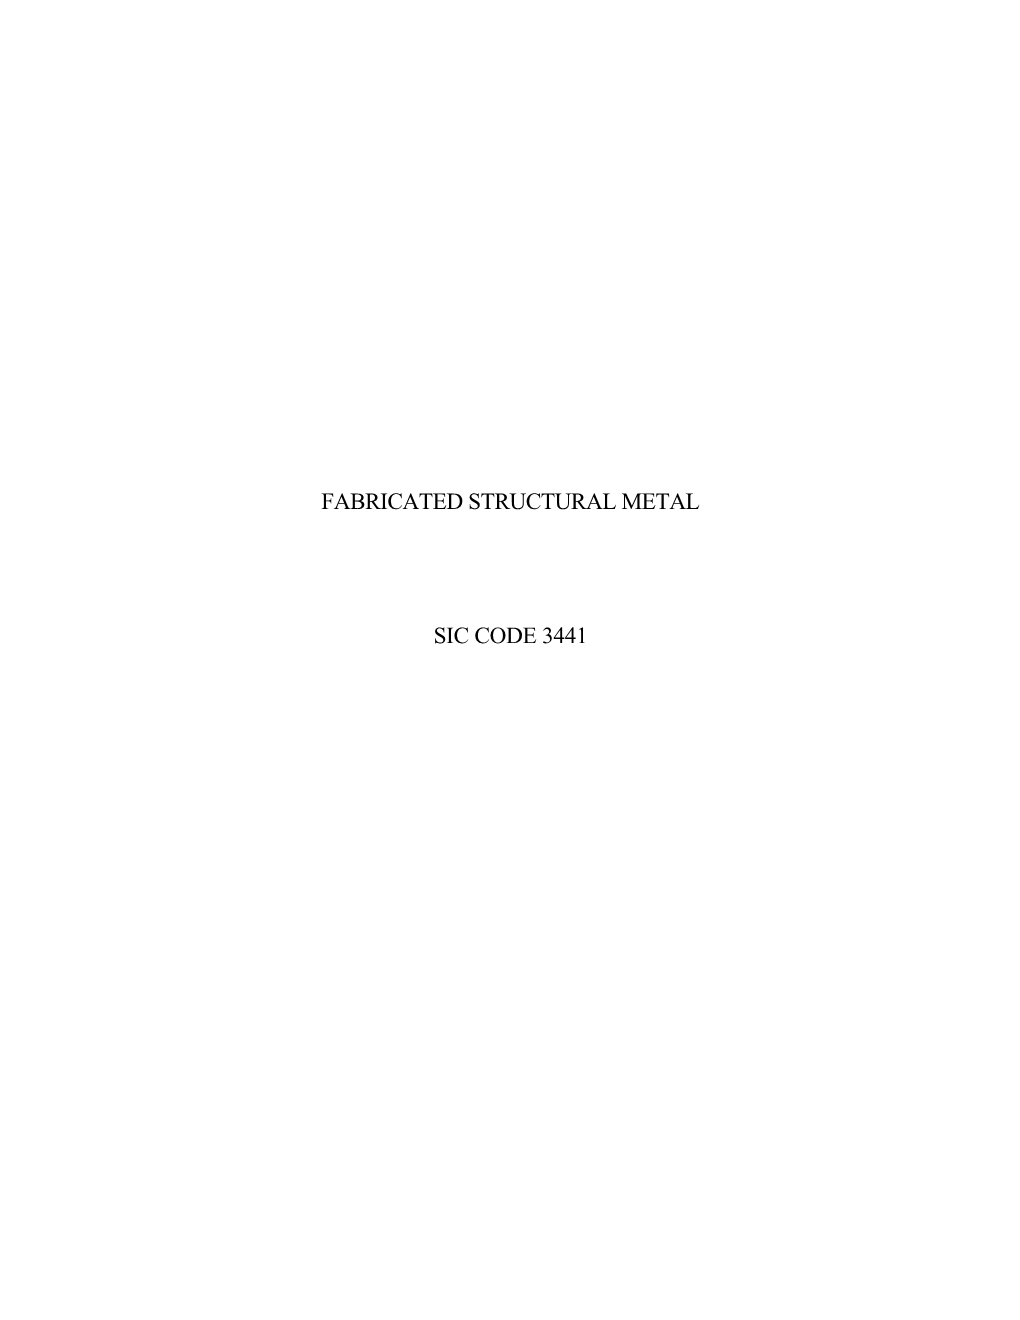 Fabricated Structural Metal